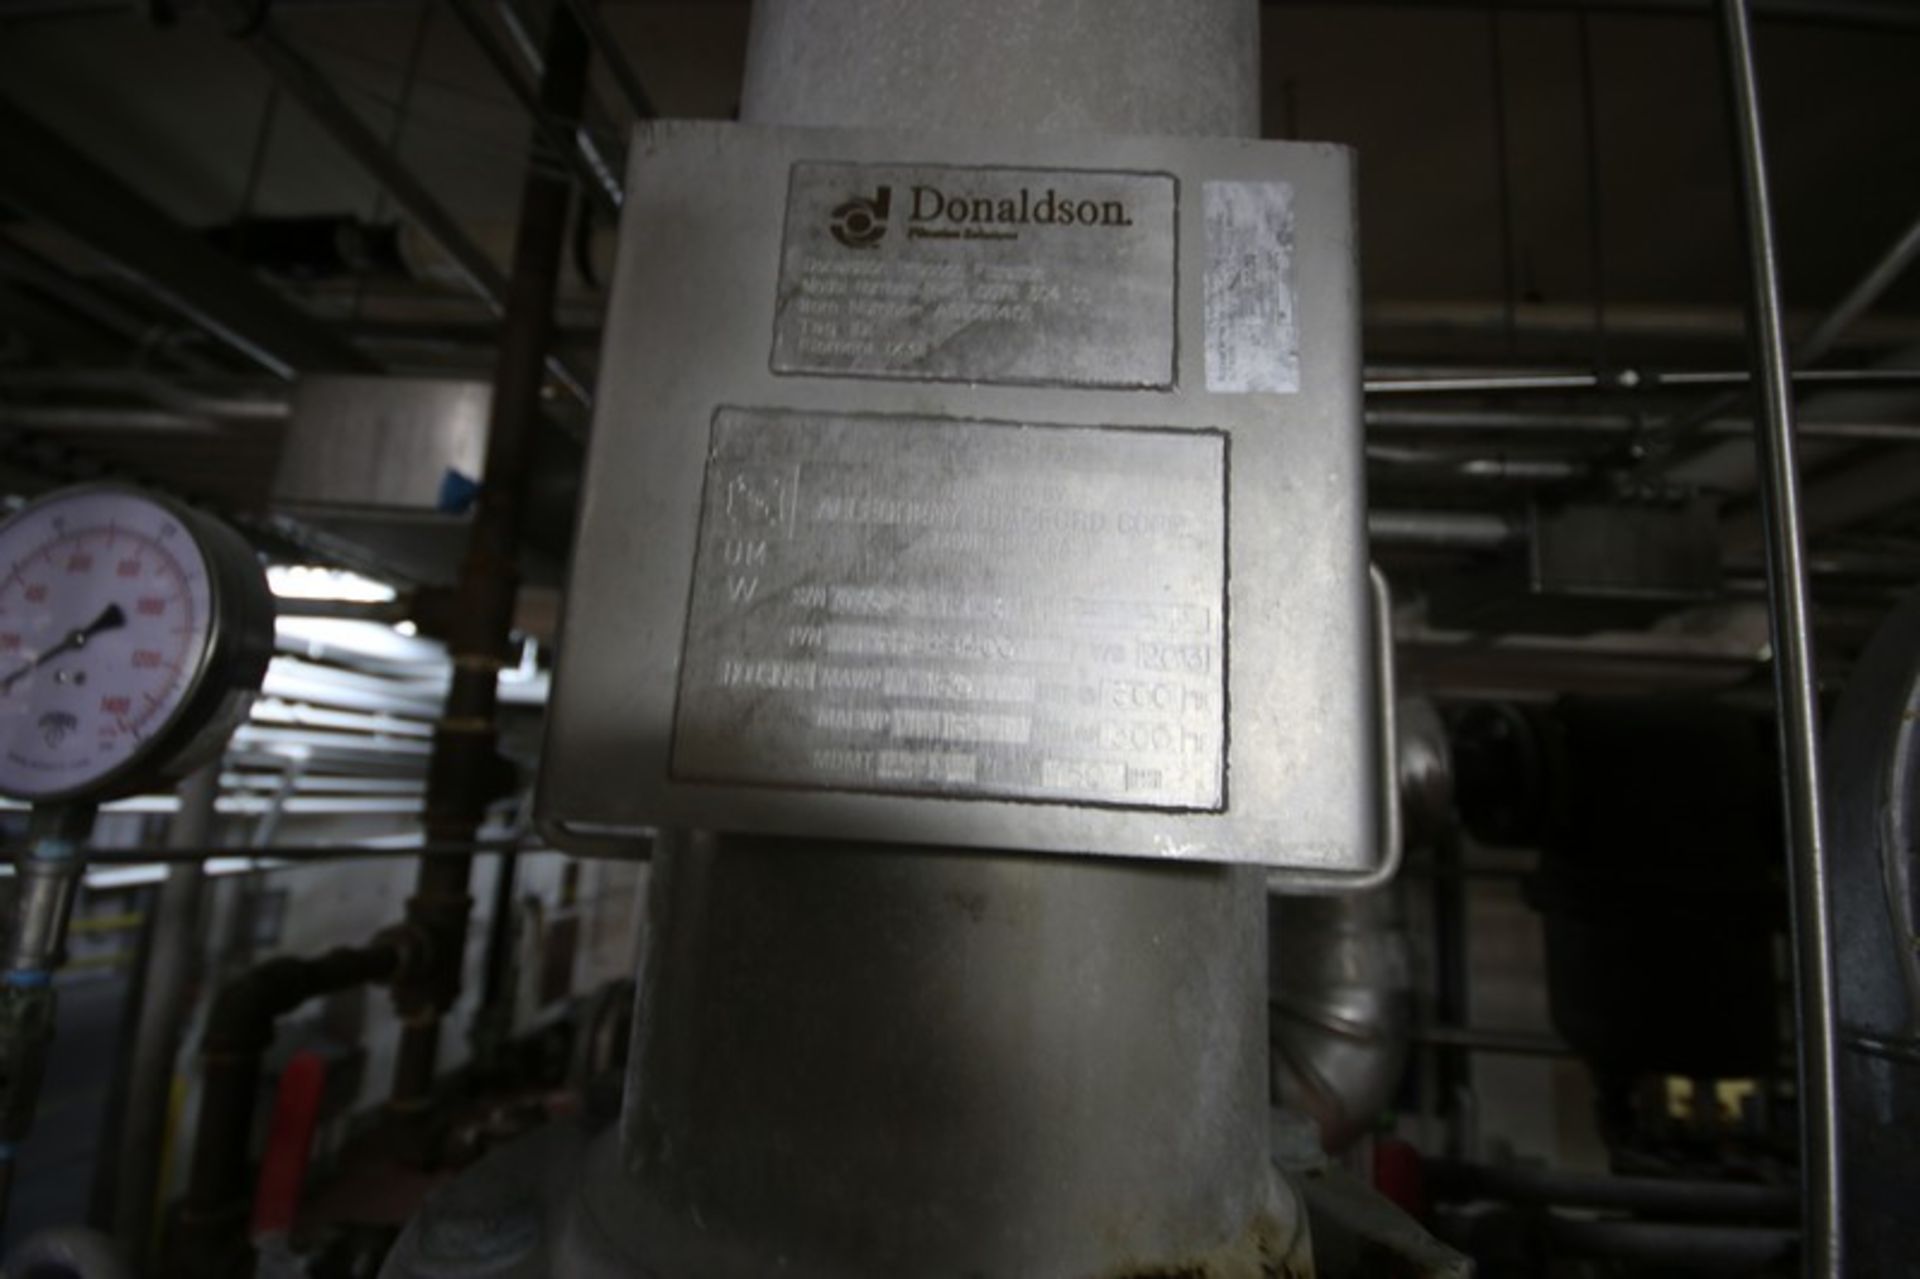 013 Donaldson Steam Filter, S/N 036261-1-1-3, Housing MAWP 150 PSI @ 300 F, MDMT 20 F @ 150 - Image 2 of 5